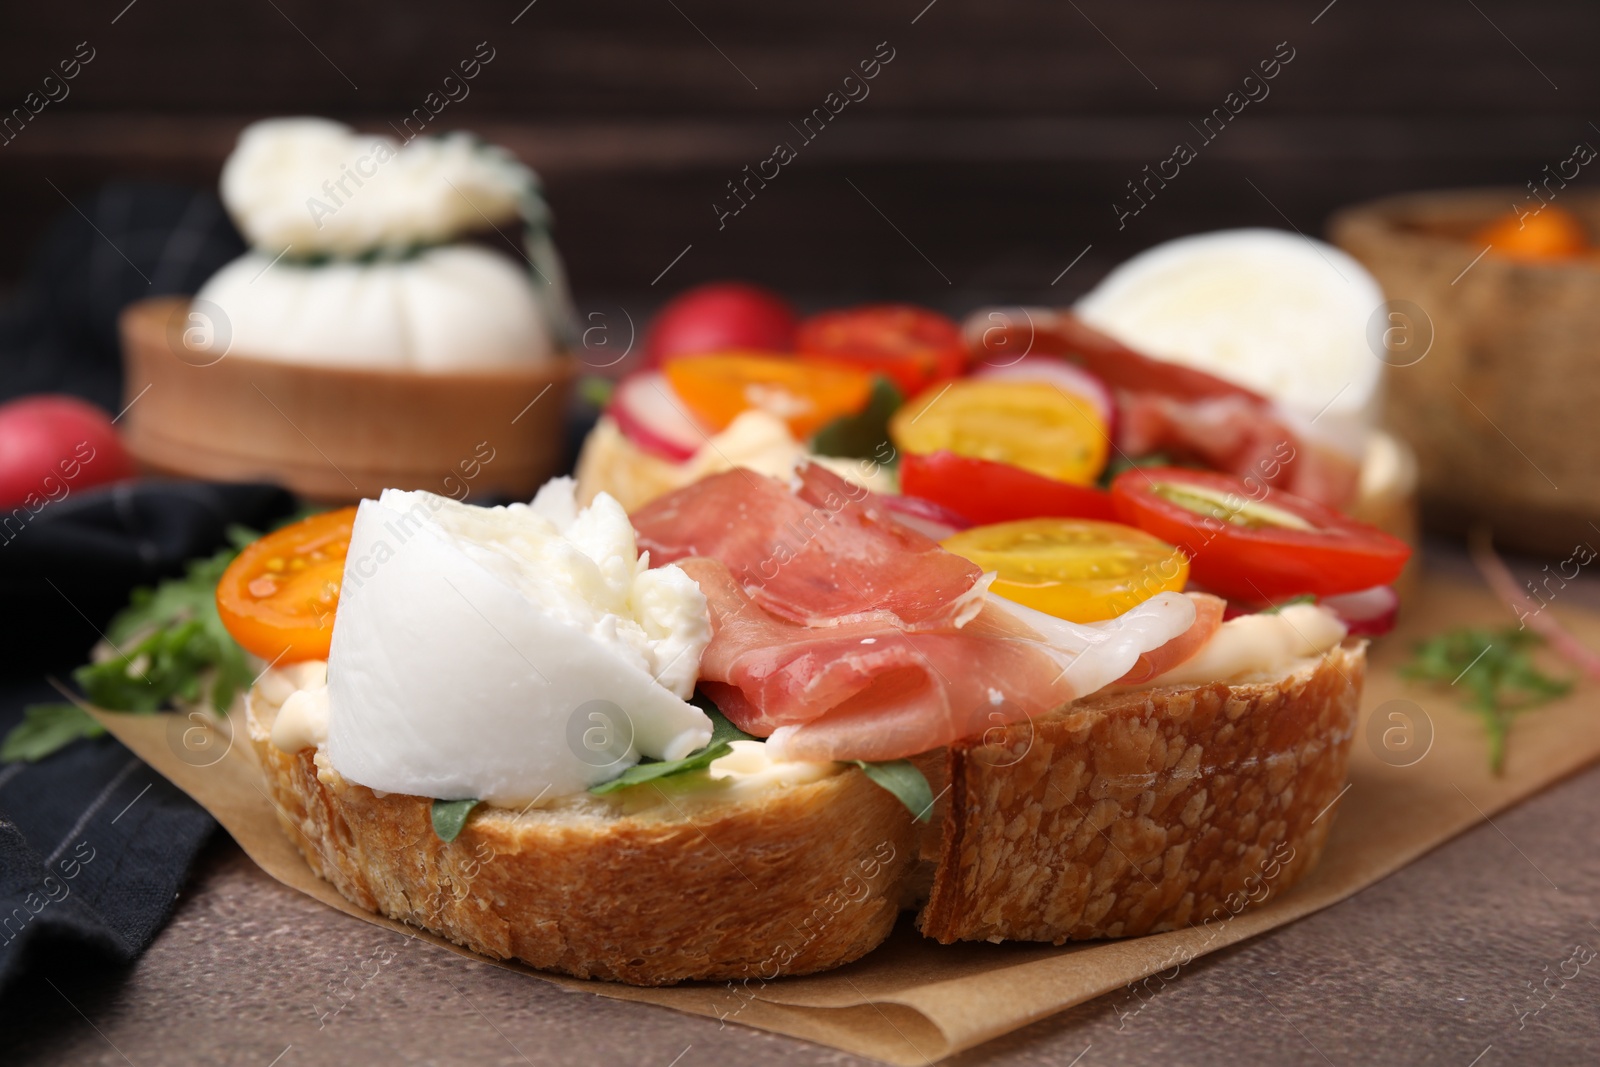 Photo of Delicious sandwich with burrata cheese, ham and tomatoes on brown textured table, closeup